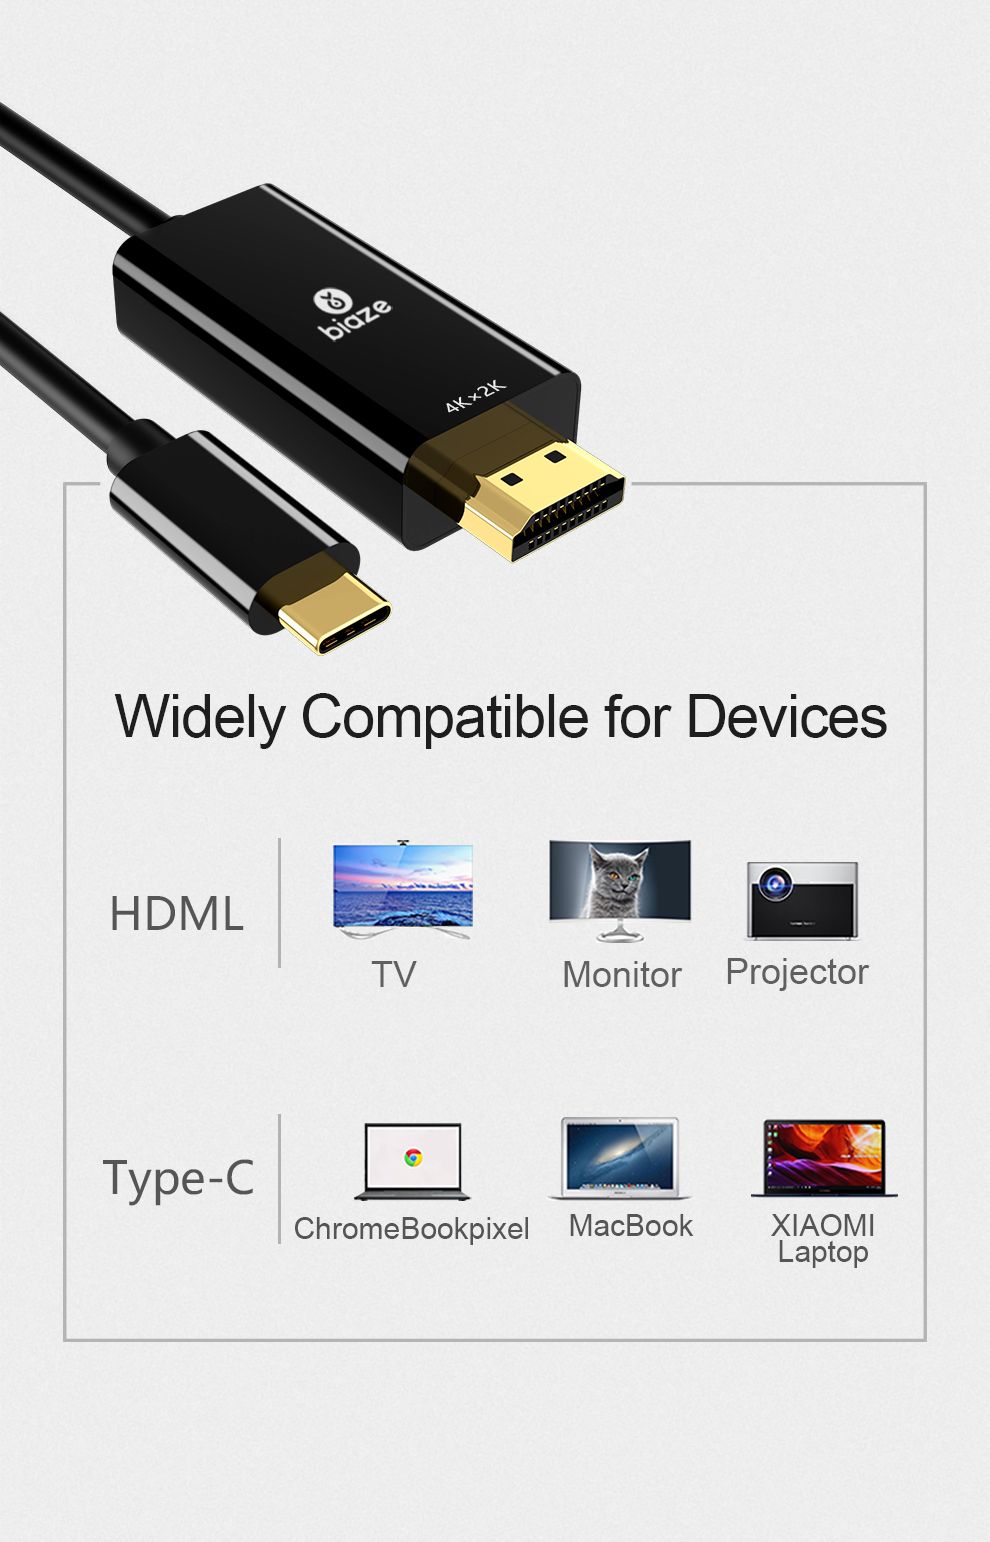 Biaze-Type-C-to-HD-Cable-4K-60Hz-Video-3M-HD-Converter-Video-Adapter-hdmi-Adapter-for-MacBook-1563743